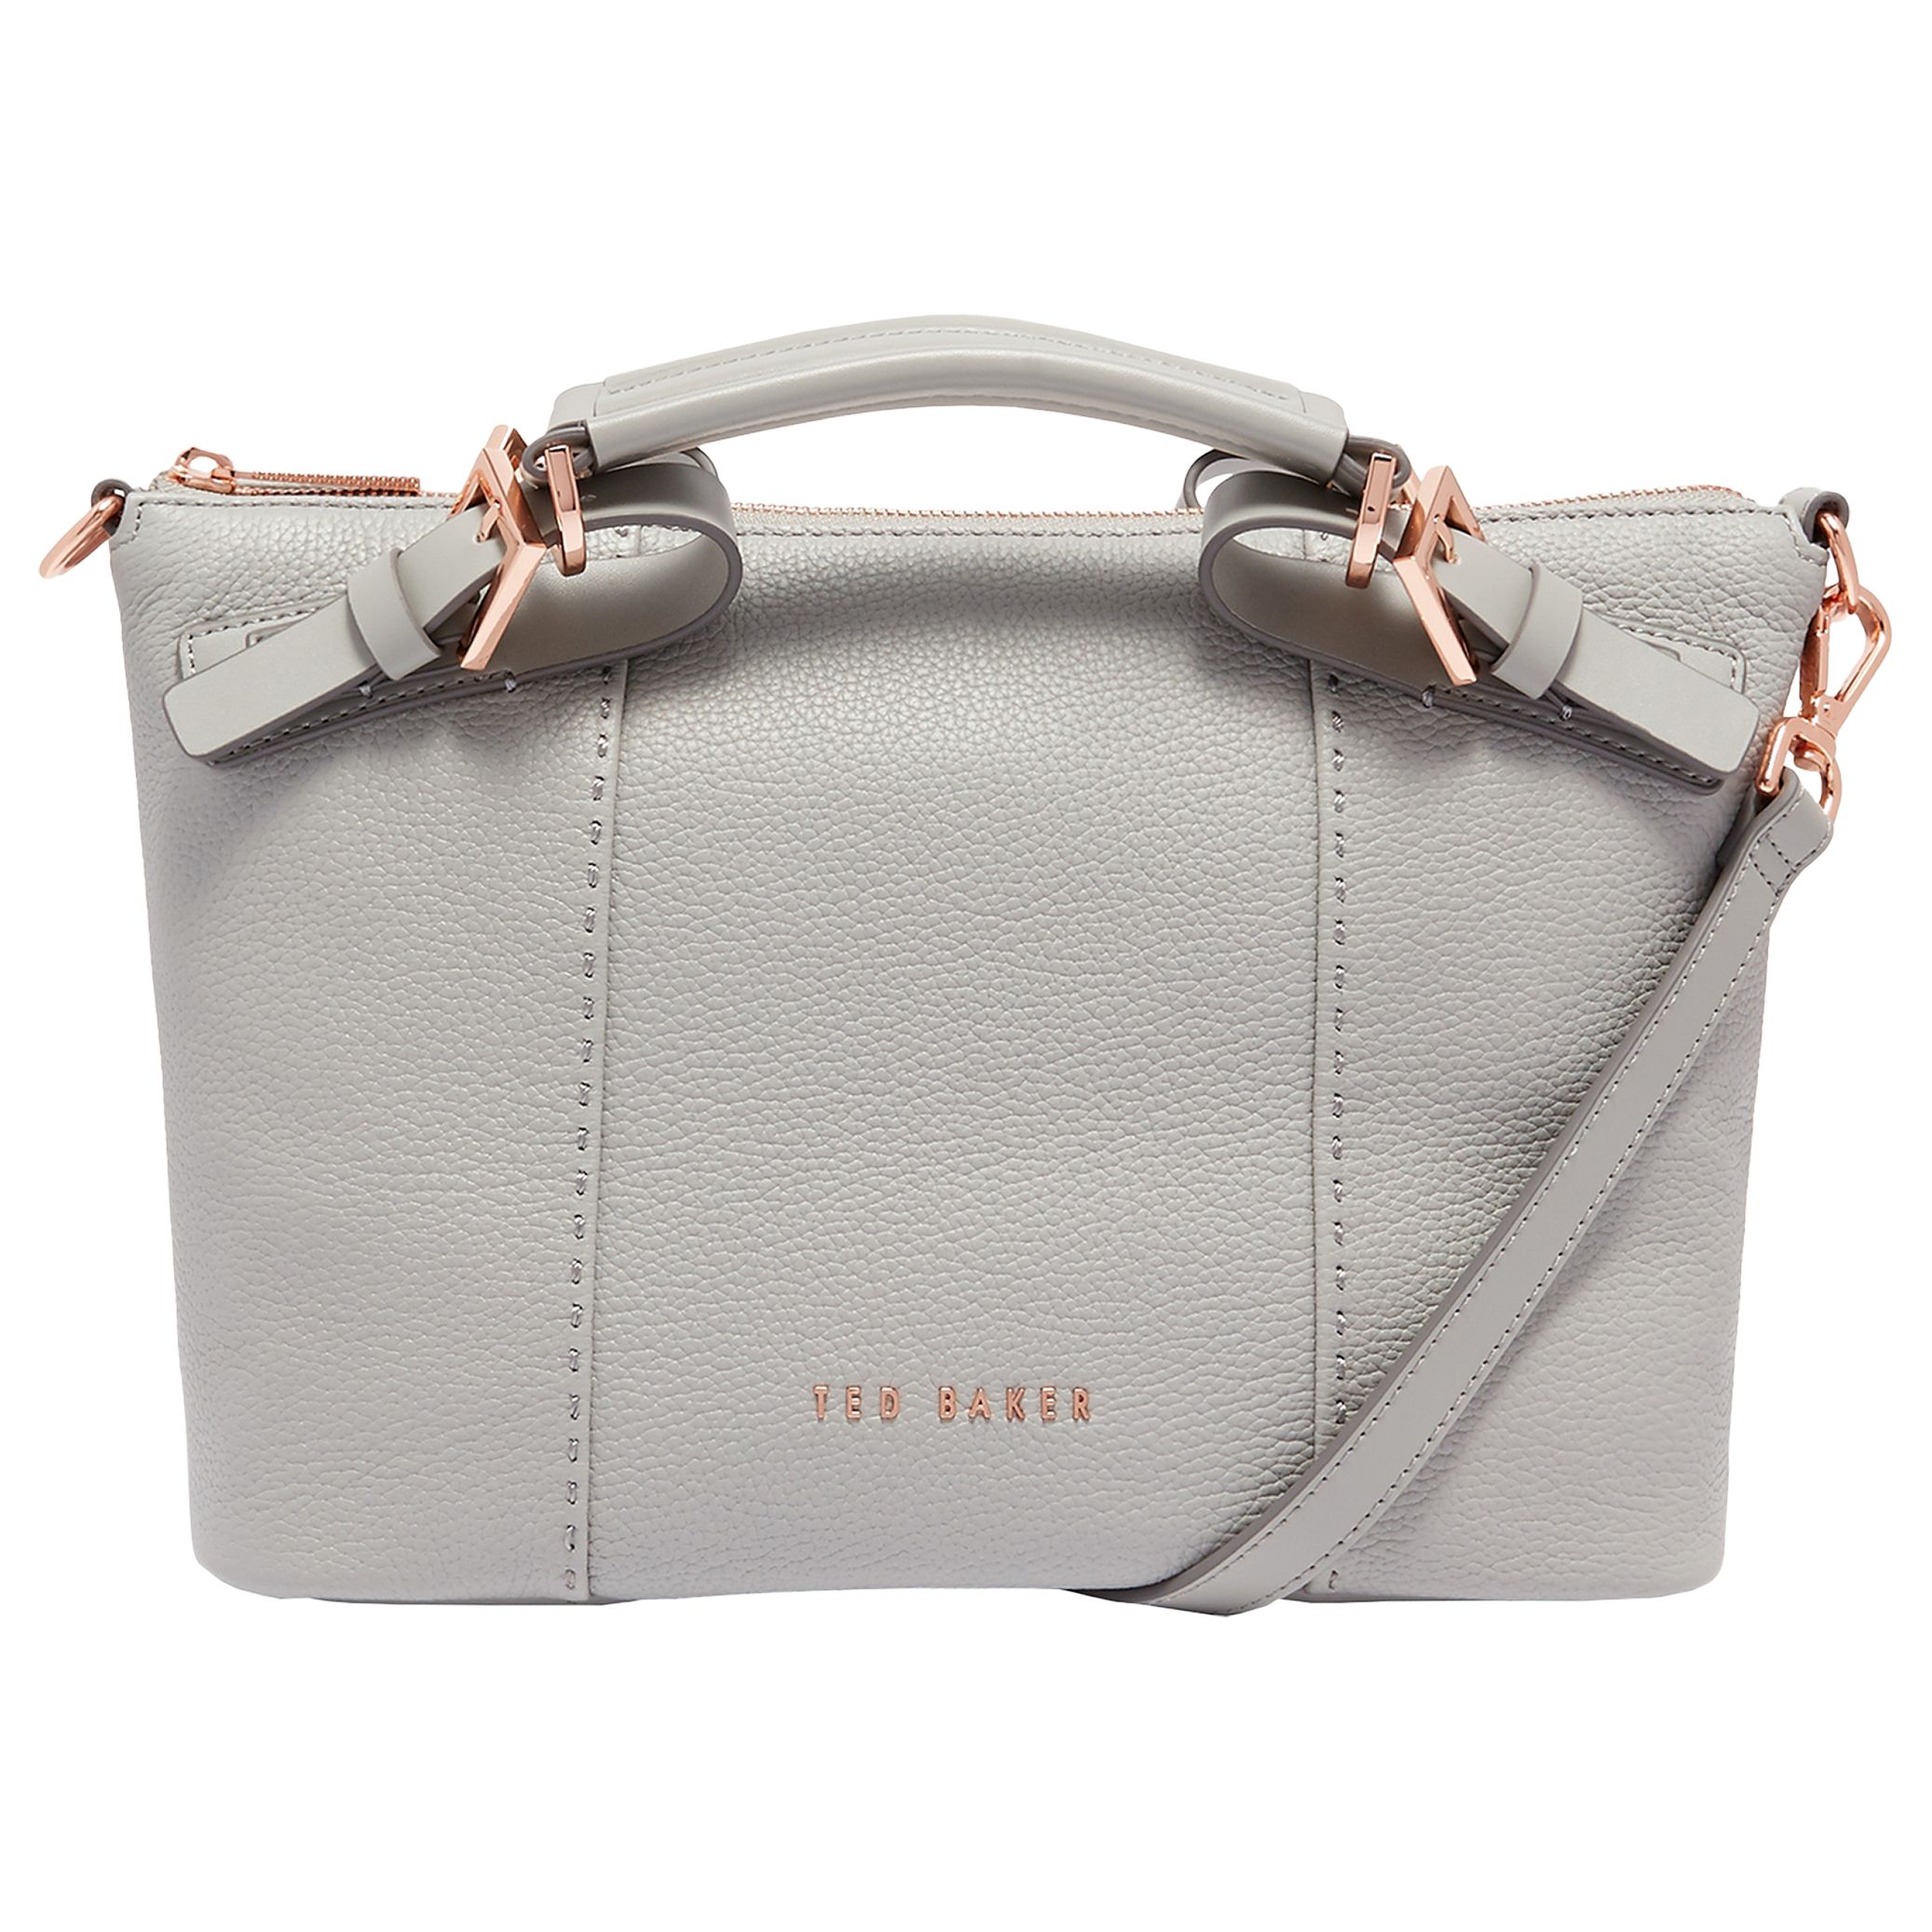 Ted Baker Salbett Pop Hand Leather Small Tote Bag